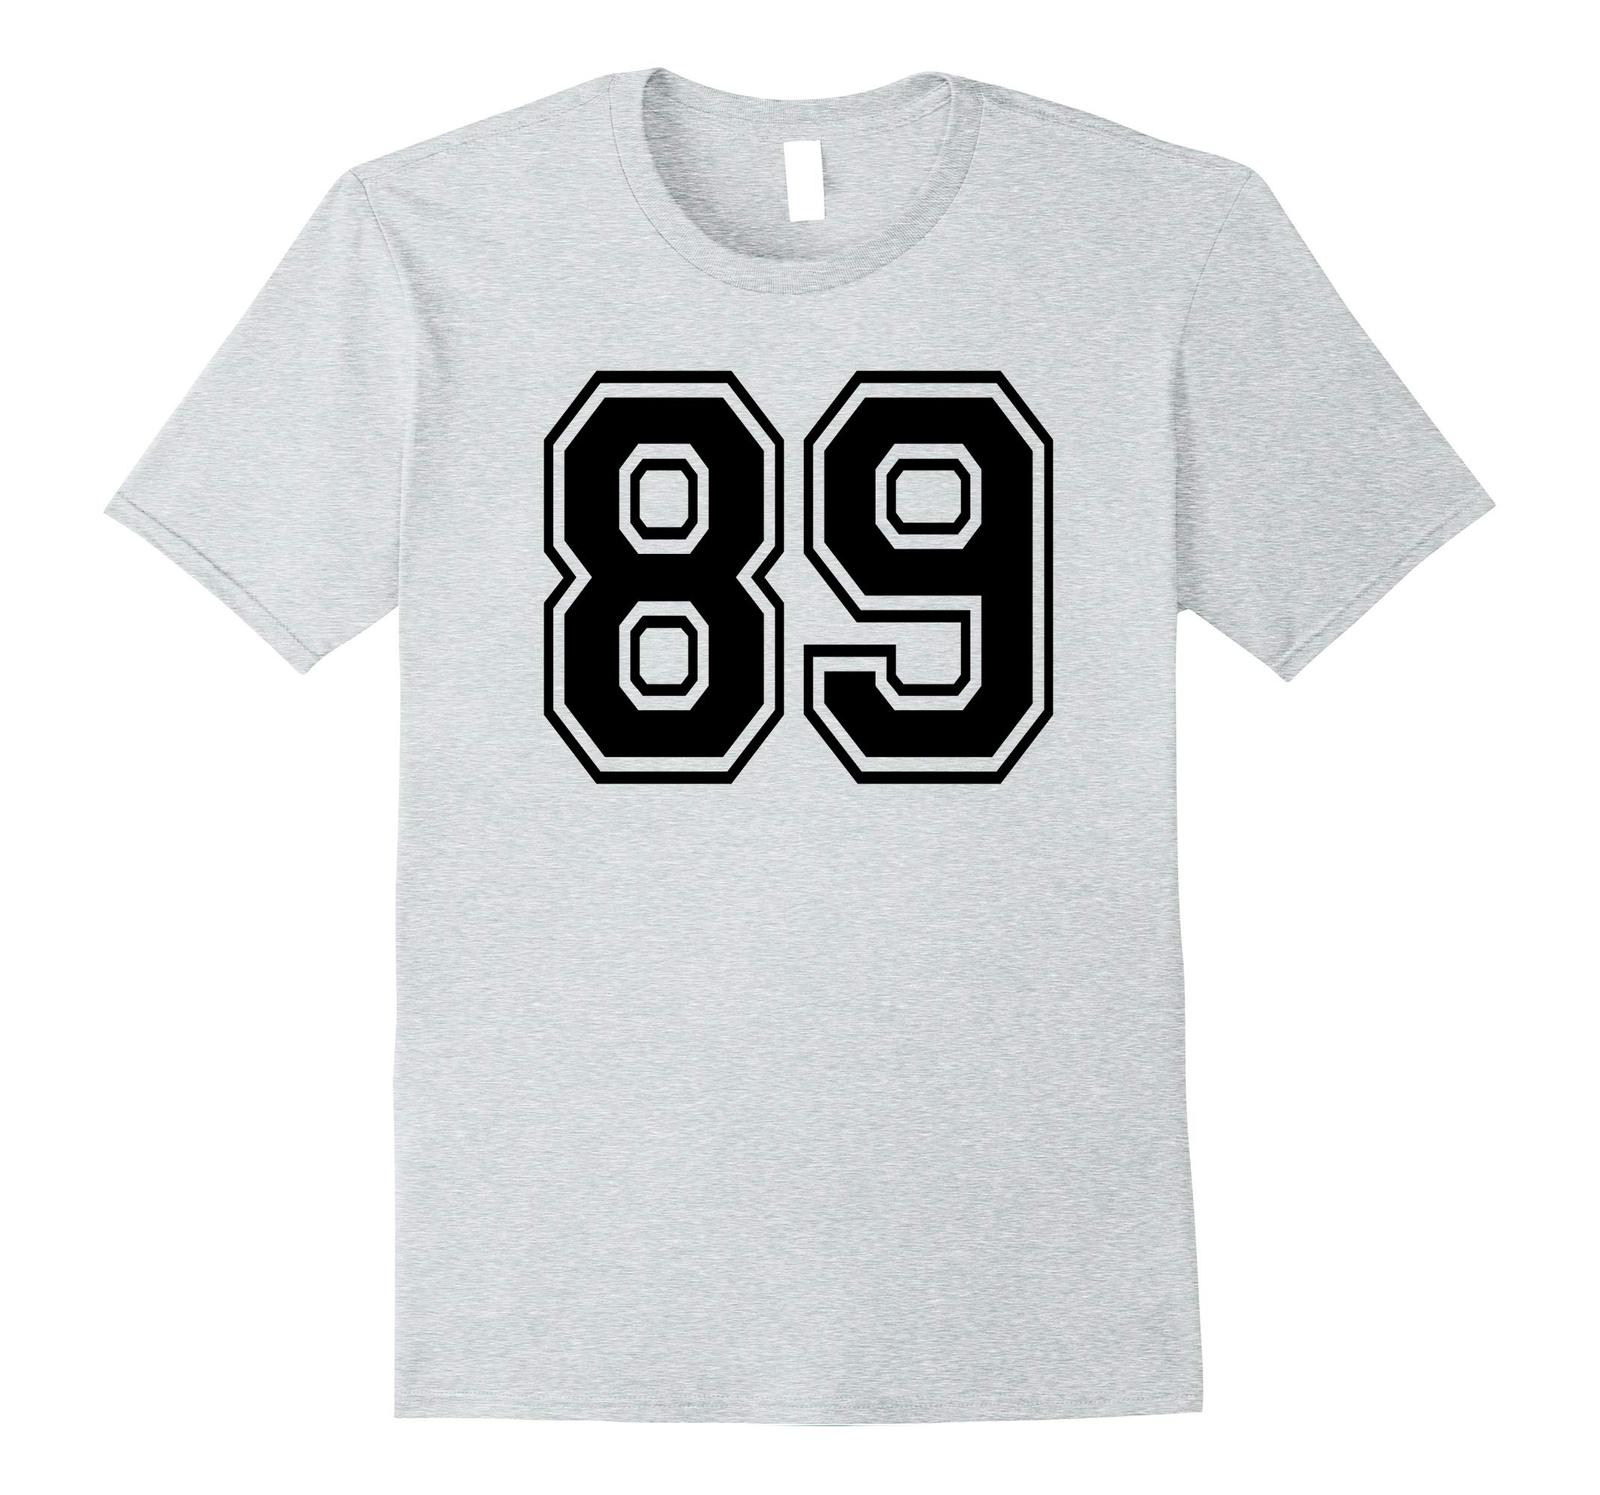 New Tee - Number #89 College Sports Team T-Tees front & back BLACK Men ...